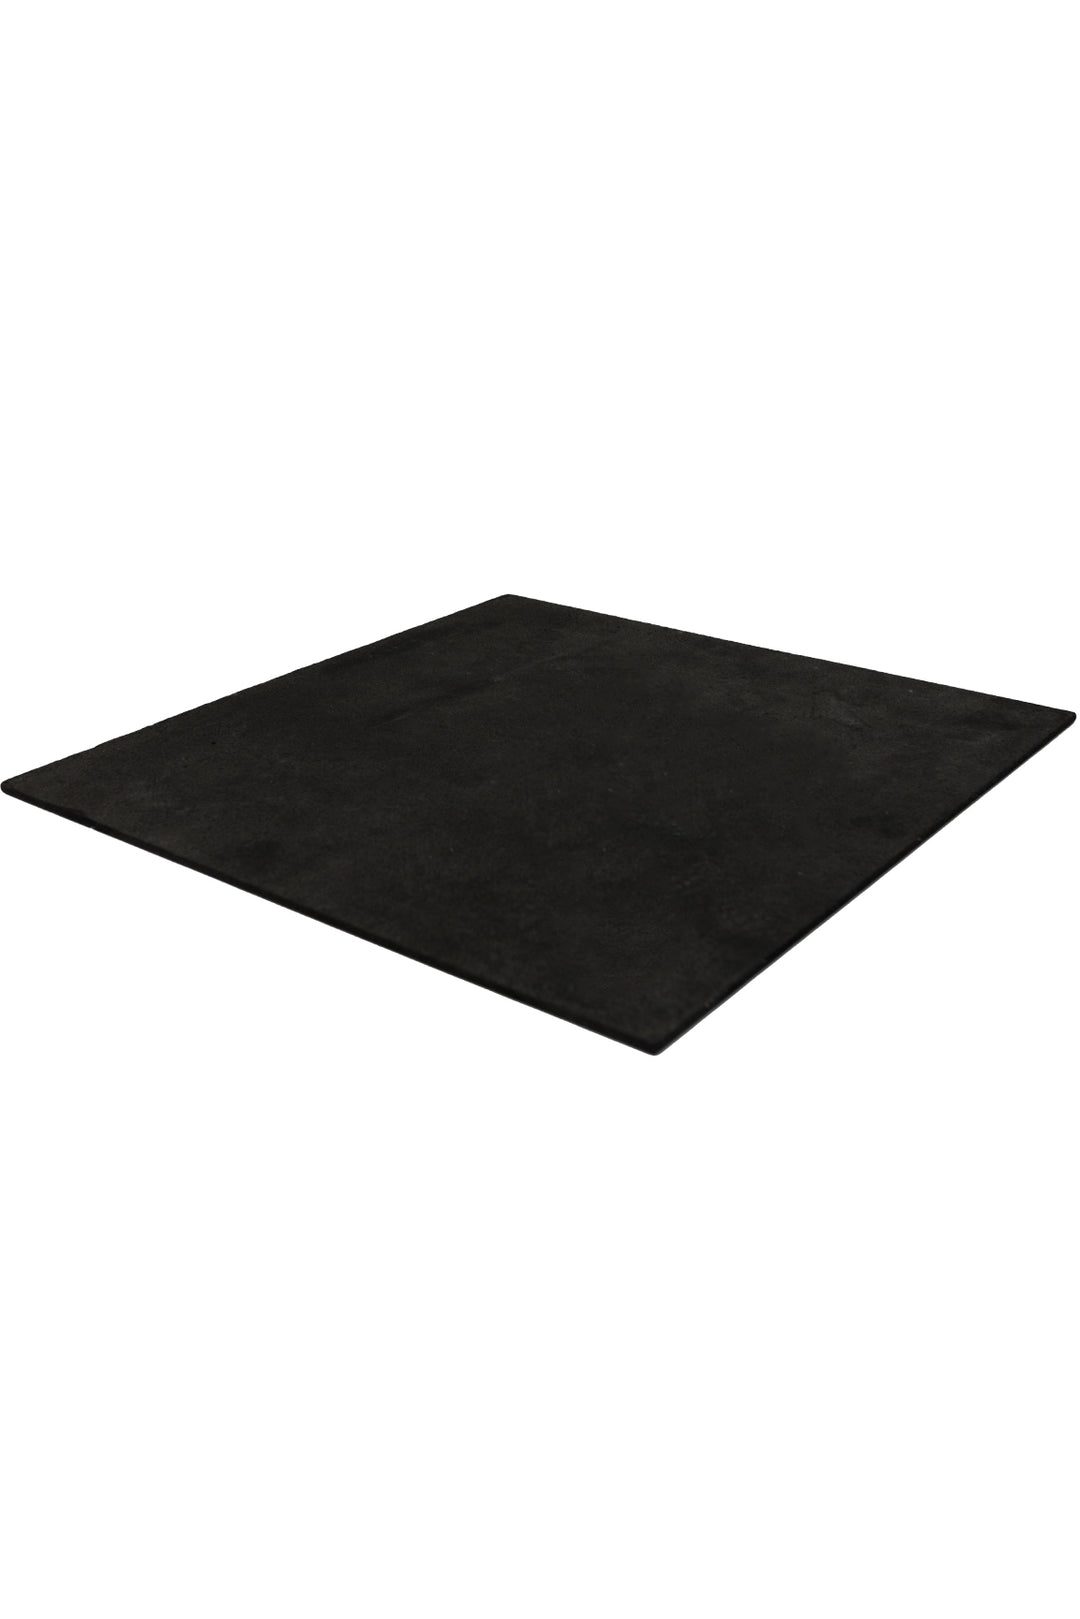 Commercial Grade Rubber Flooring Mats 1 m x 1 m - 10 Square Meters